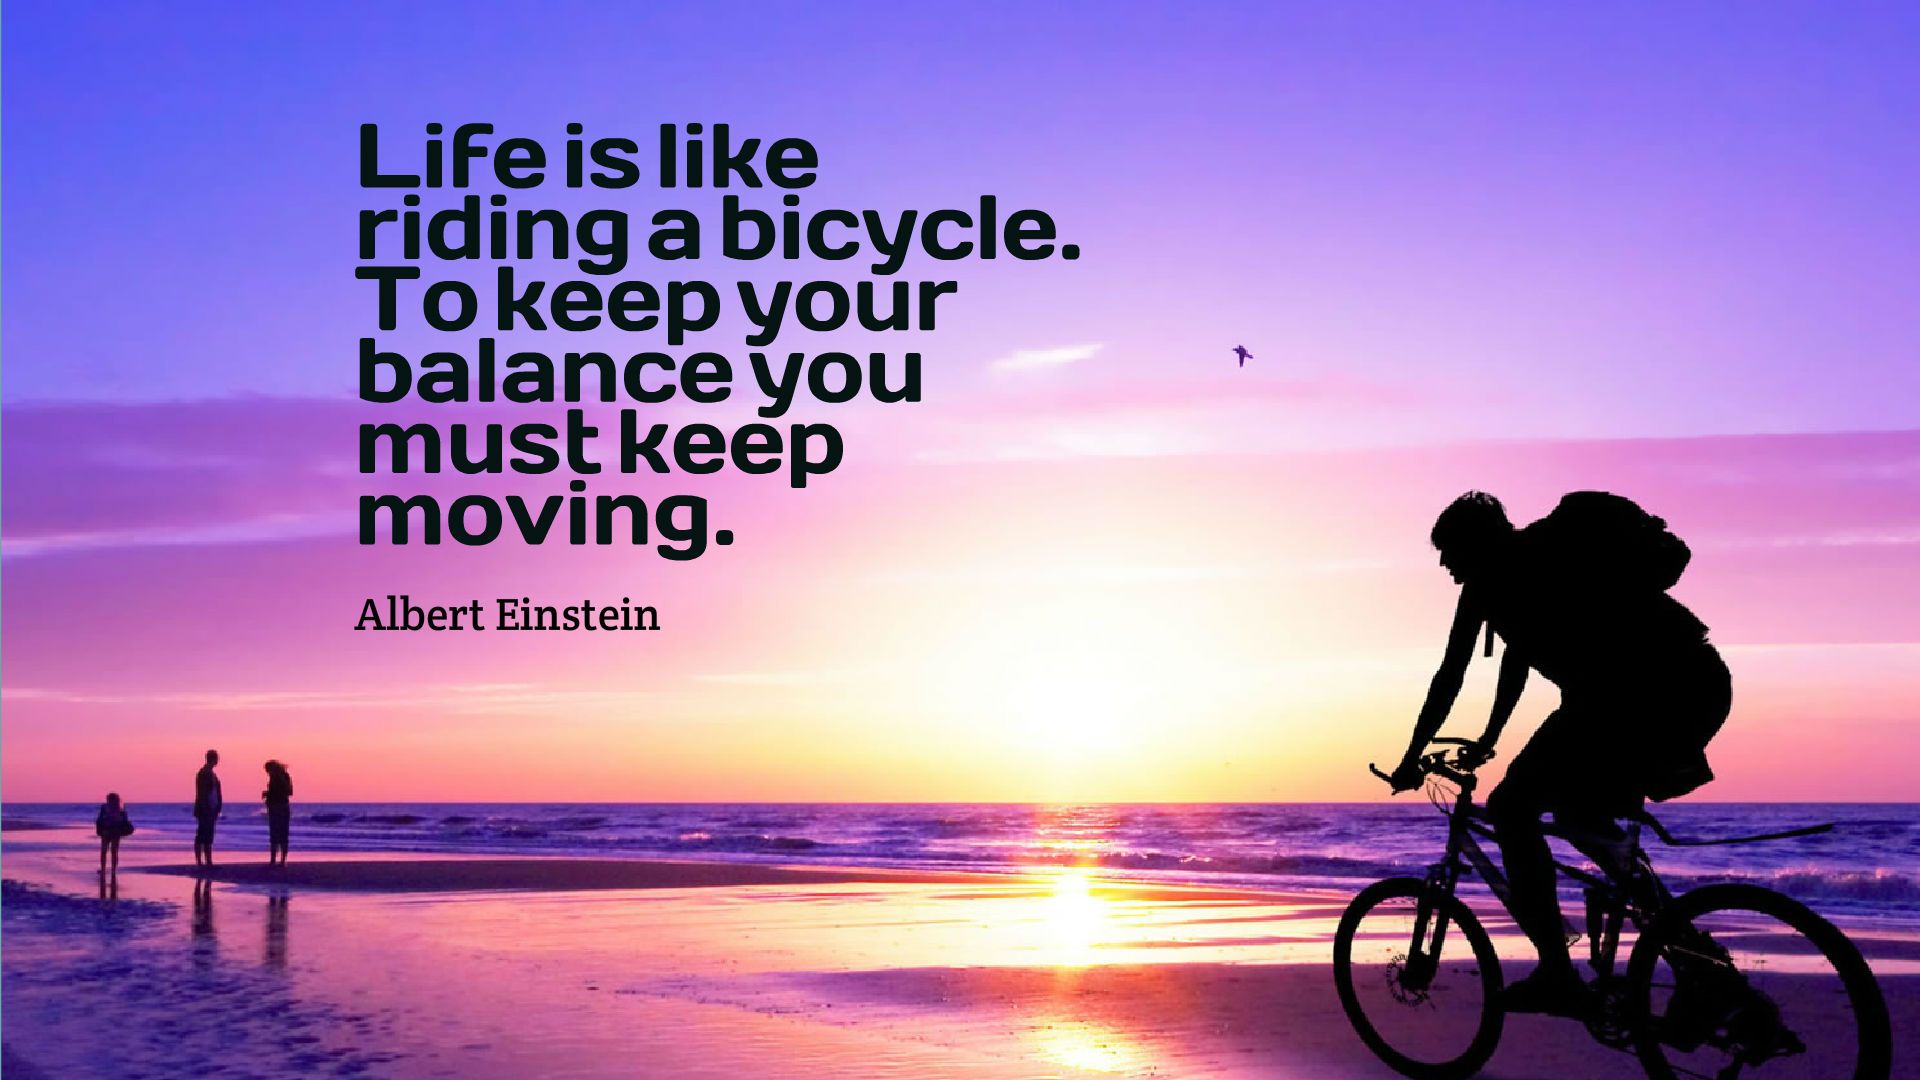 Life Is A Riding Bicycle Quotes Wallpaper 10723